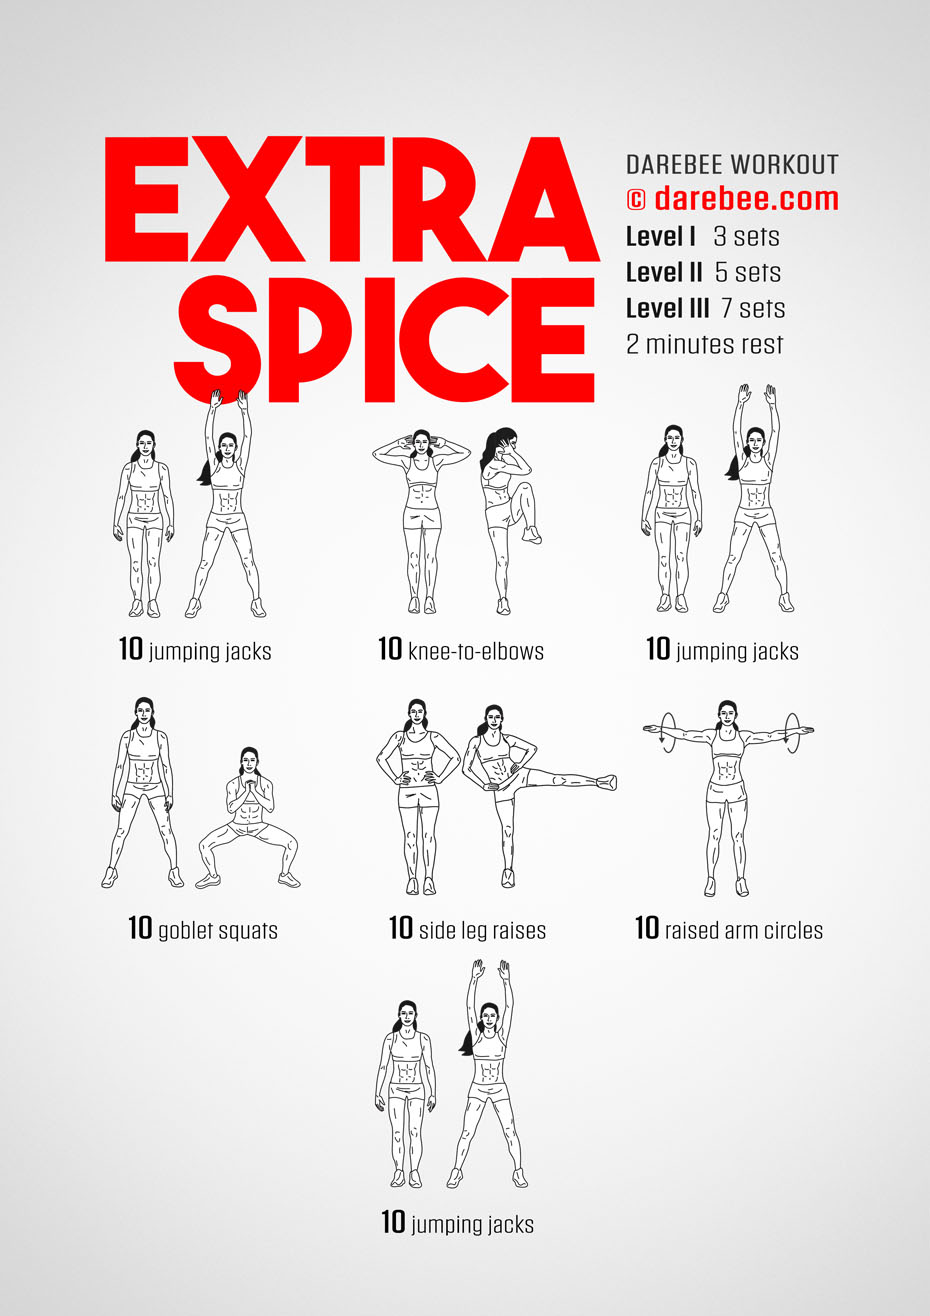 Extra Spice workout by Darebee